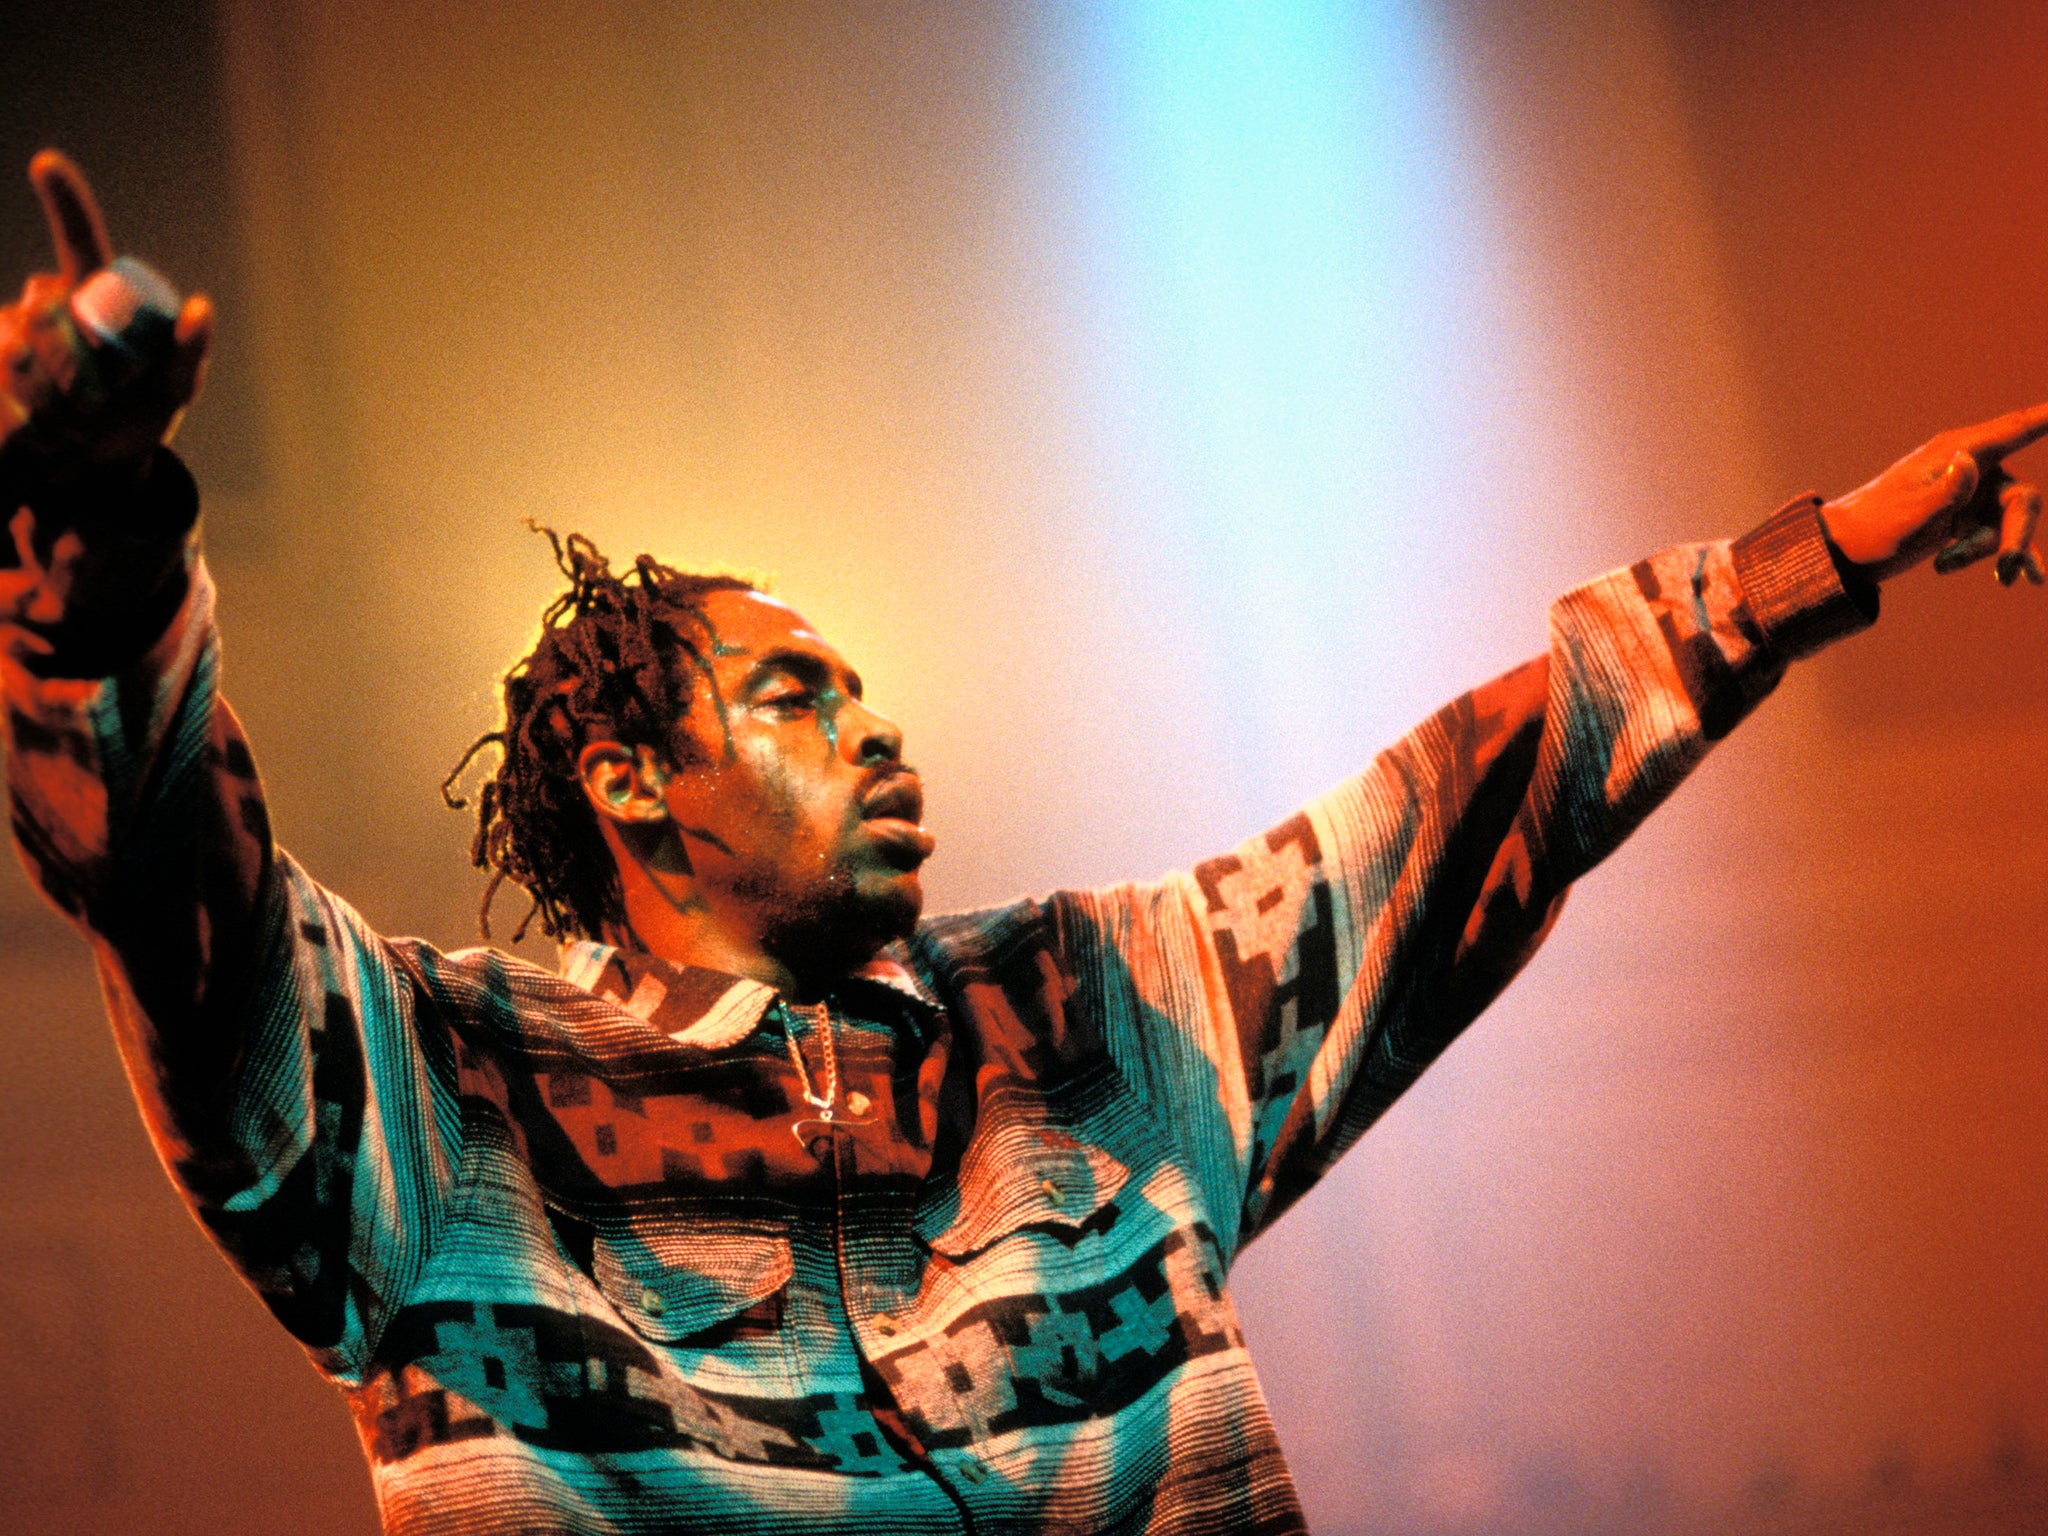 The artist formerly known as Artis Leon Ivey Jr, on stage at Paradiso in Amsterdam in January 1996